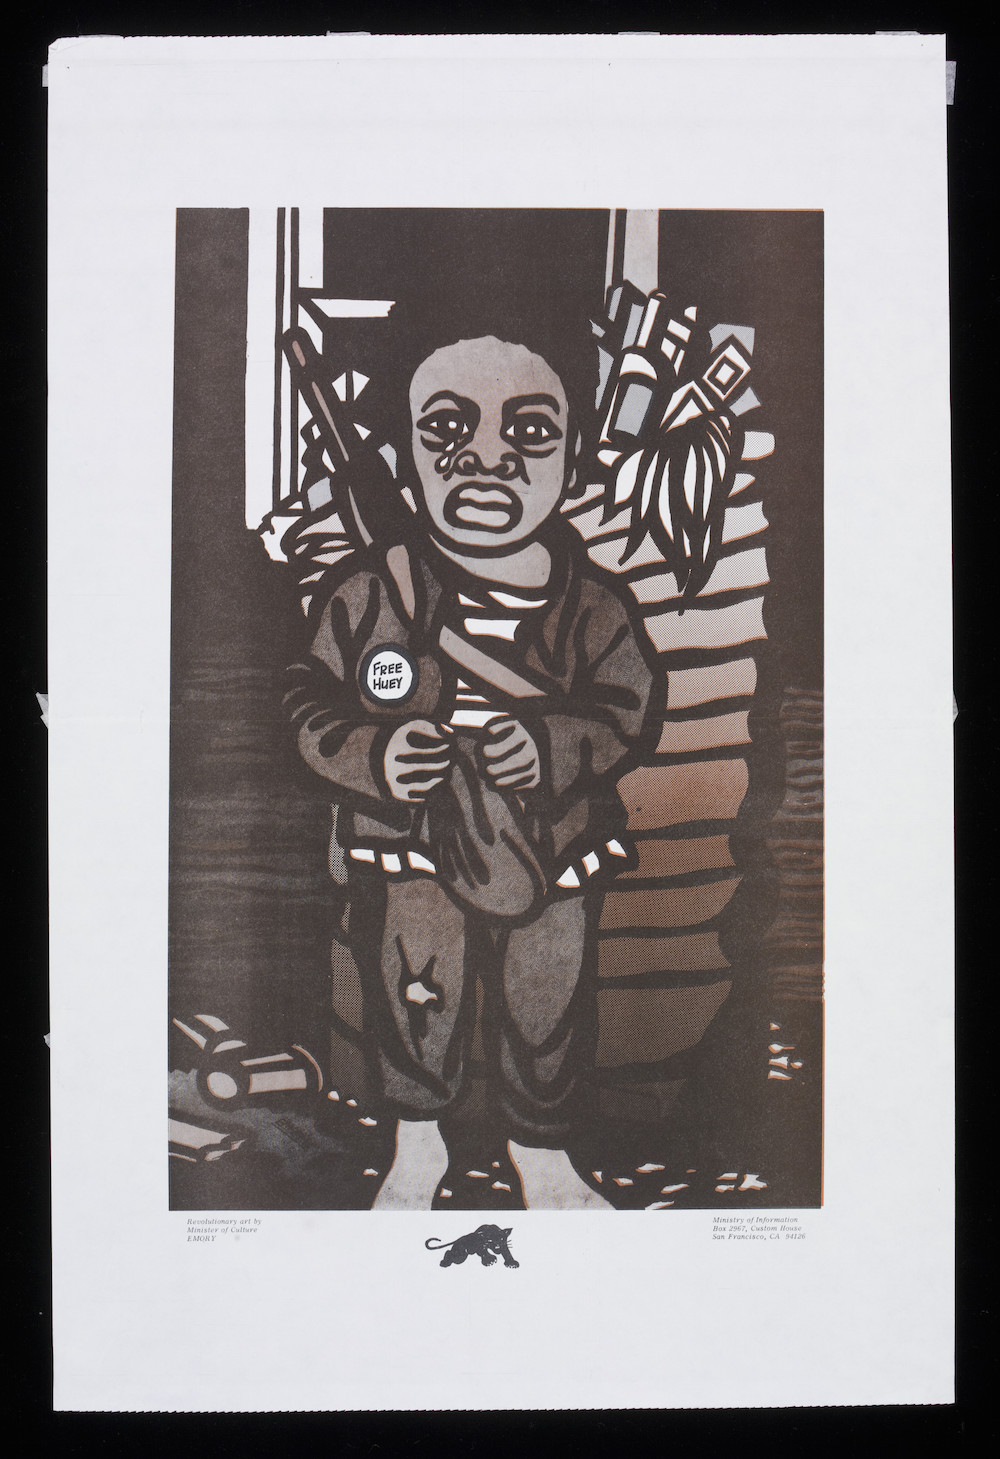 Revisiting "Soul of a Nation: Art in the Age of Black Power"